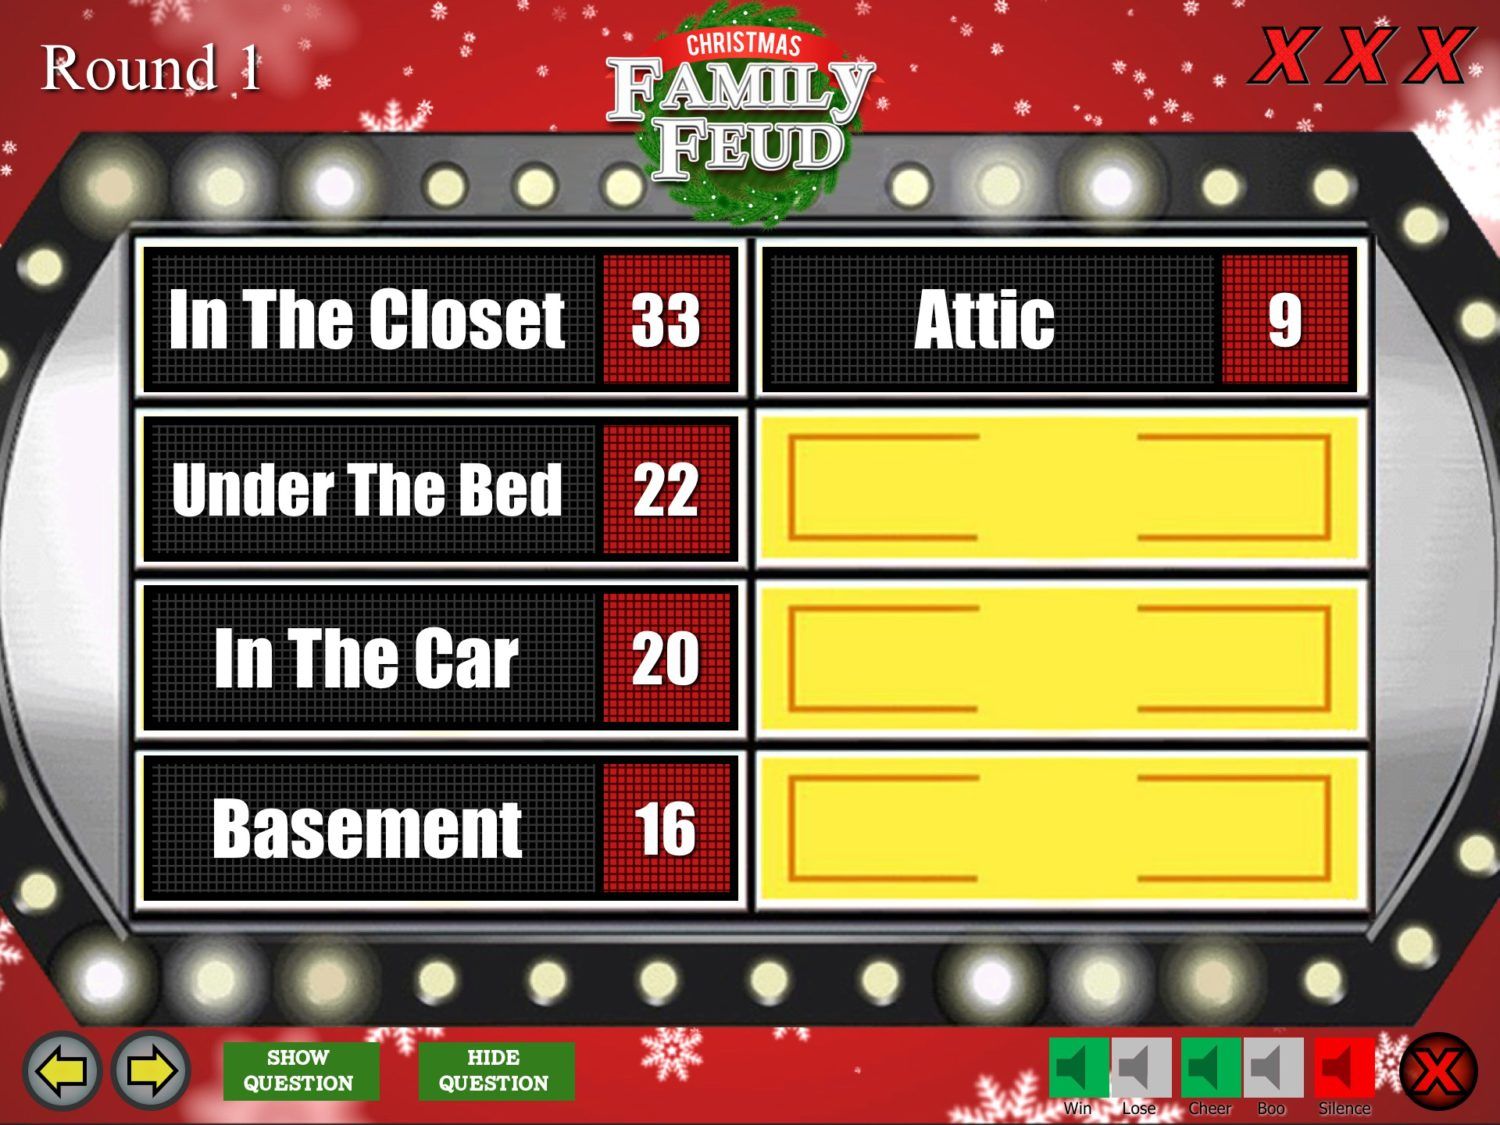 Free download of family feud